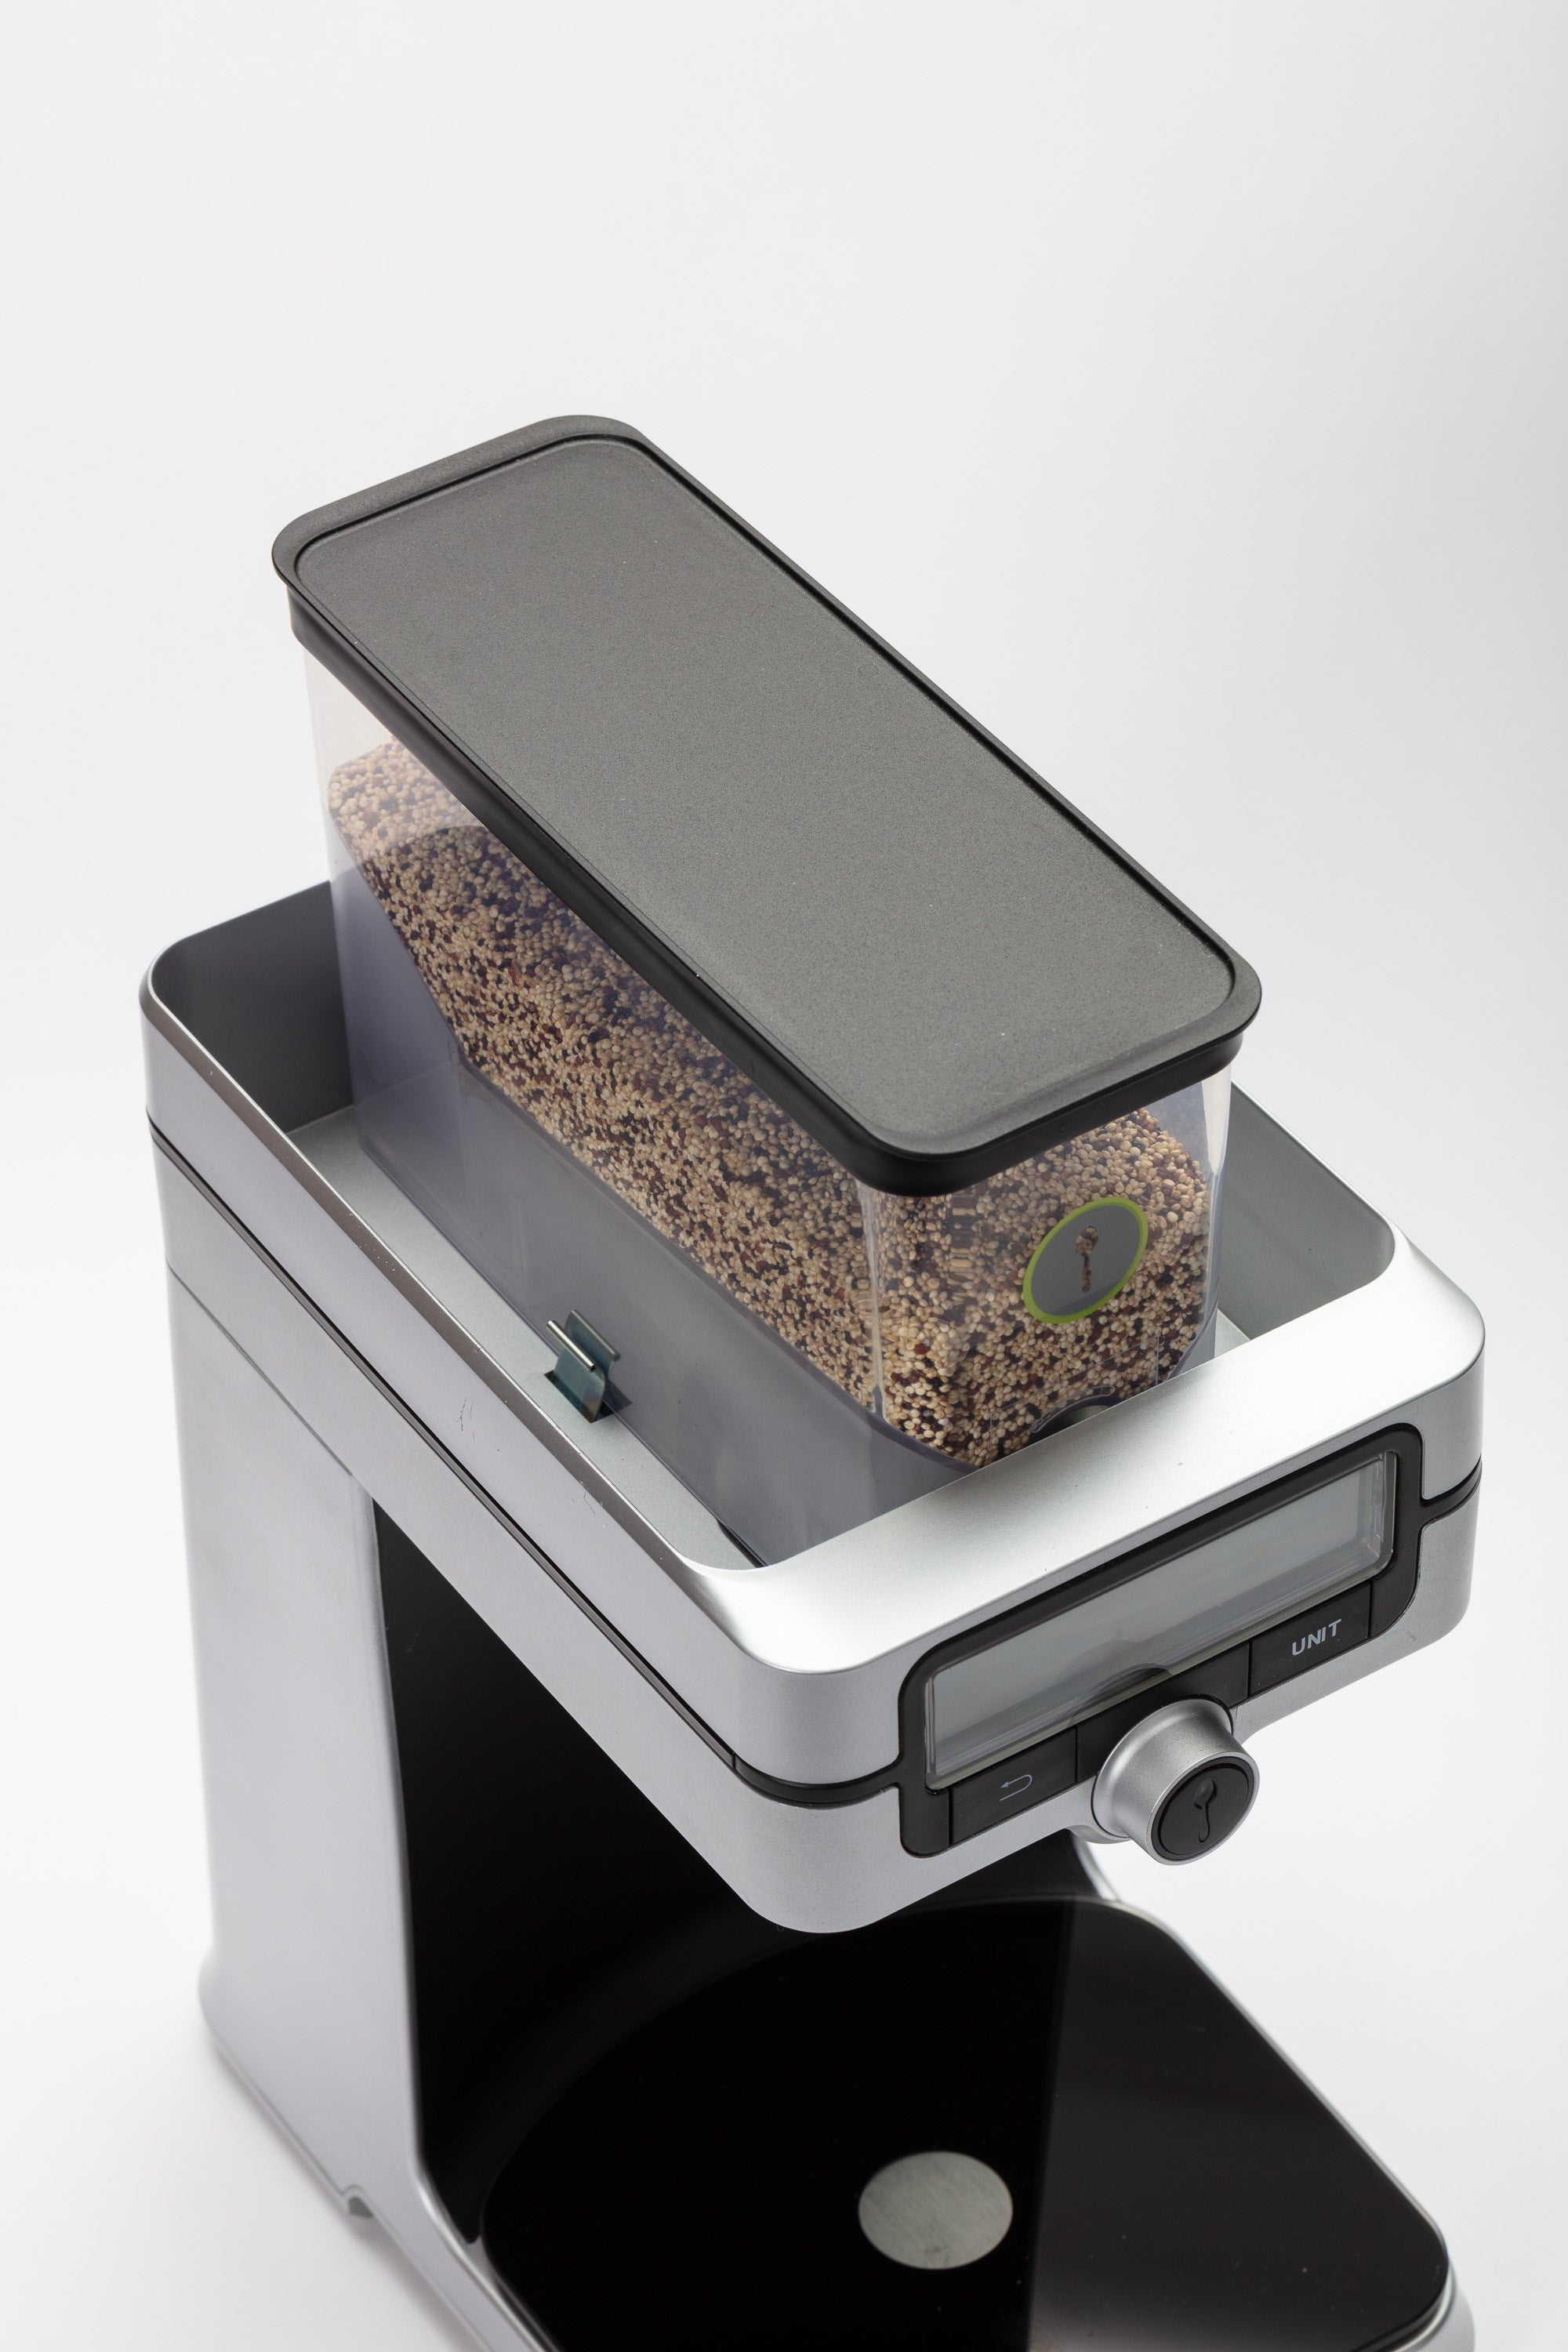 Automatically weigh and dispense ingredients without dispensing more cash  with PantryChic's Prime Day deal